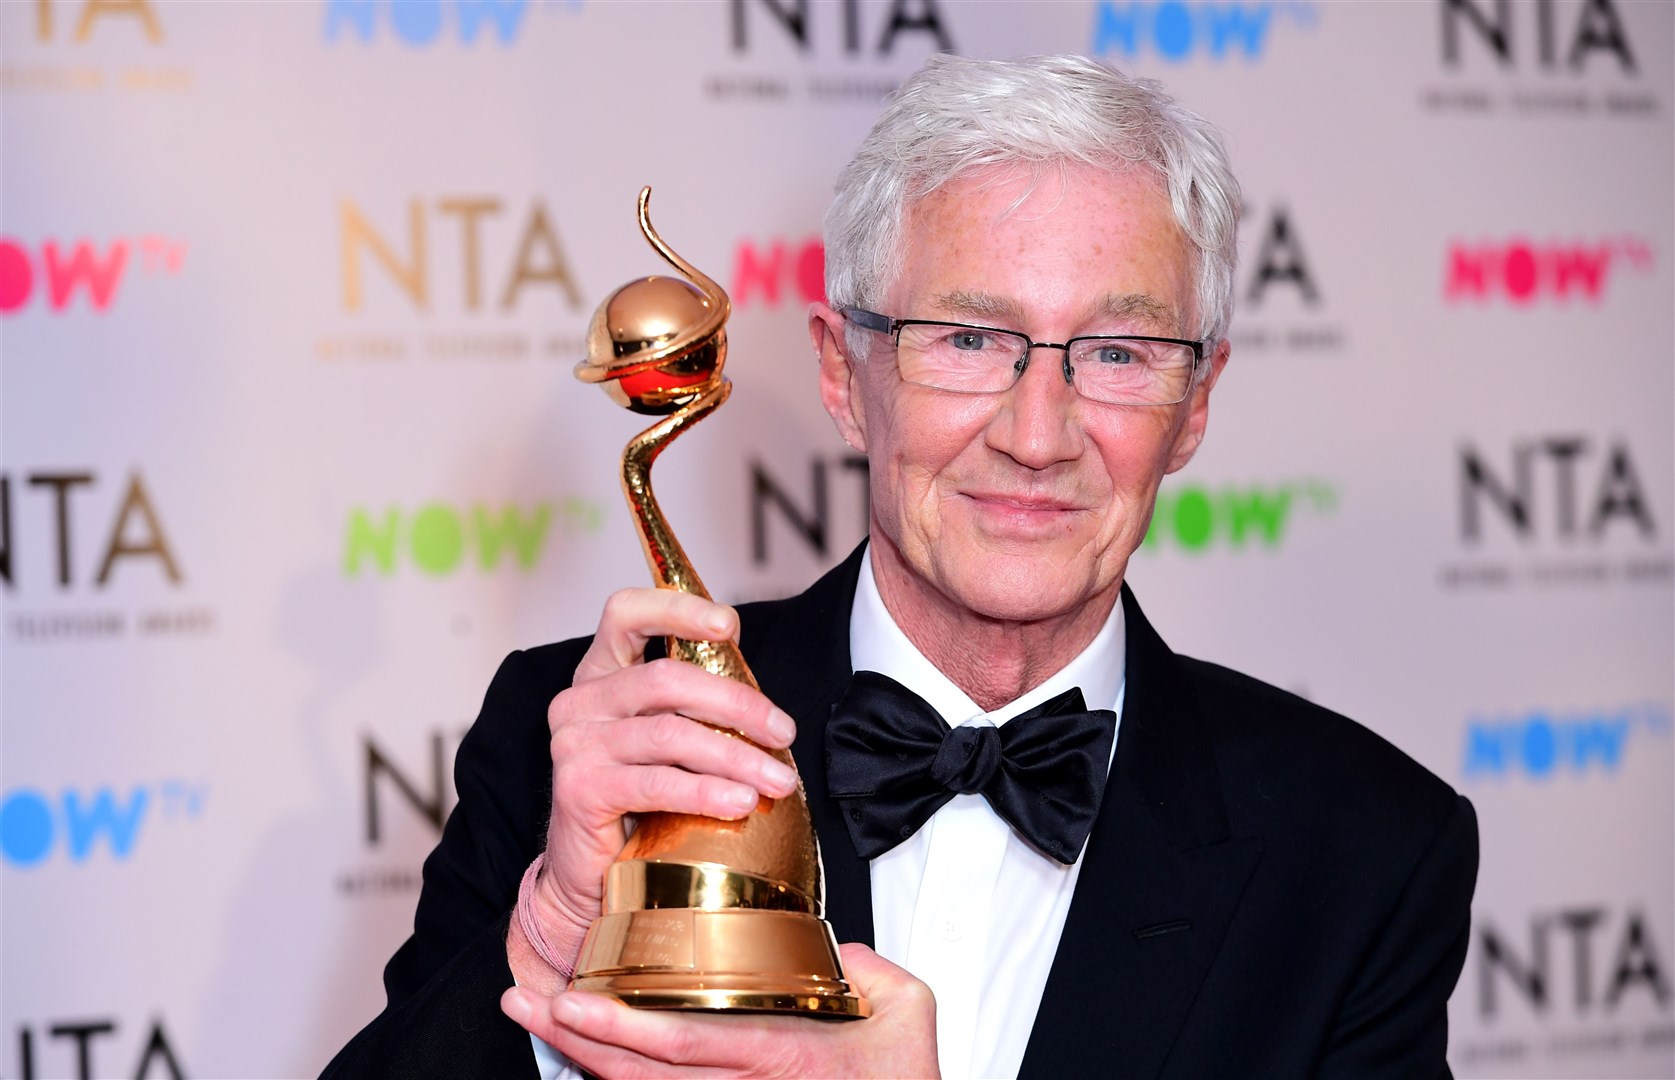 Performing under his own name, O’Grady’s success arguably reached new heights with the daytime chat shows, The Paul O’Grady Show and The New Paul O’Grady Show – and a galaxy of awards followed (Ian West/PA)